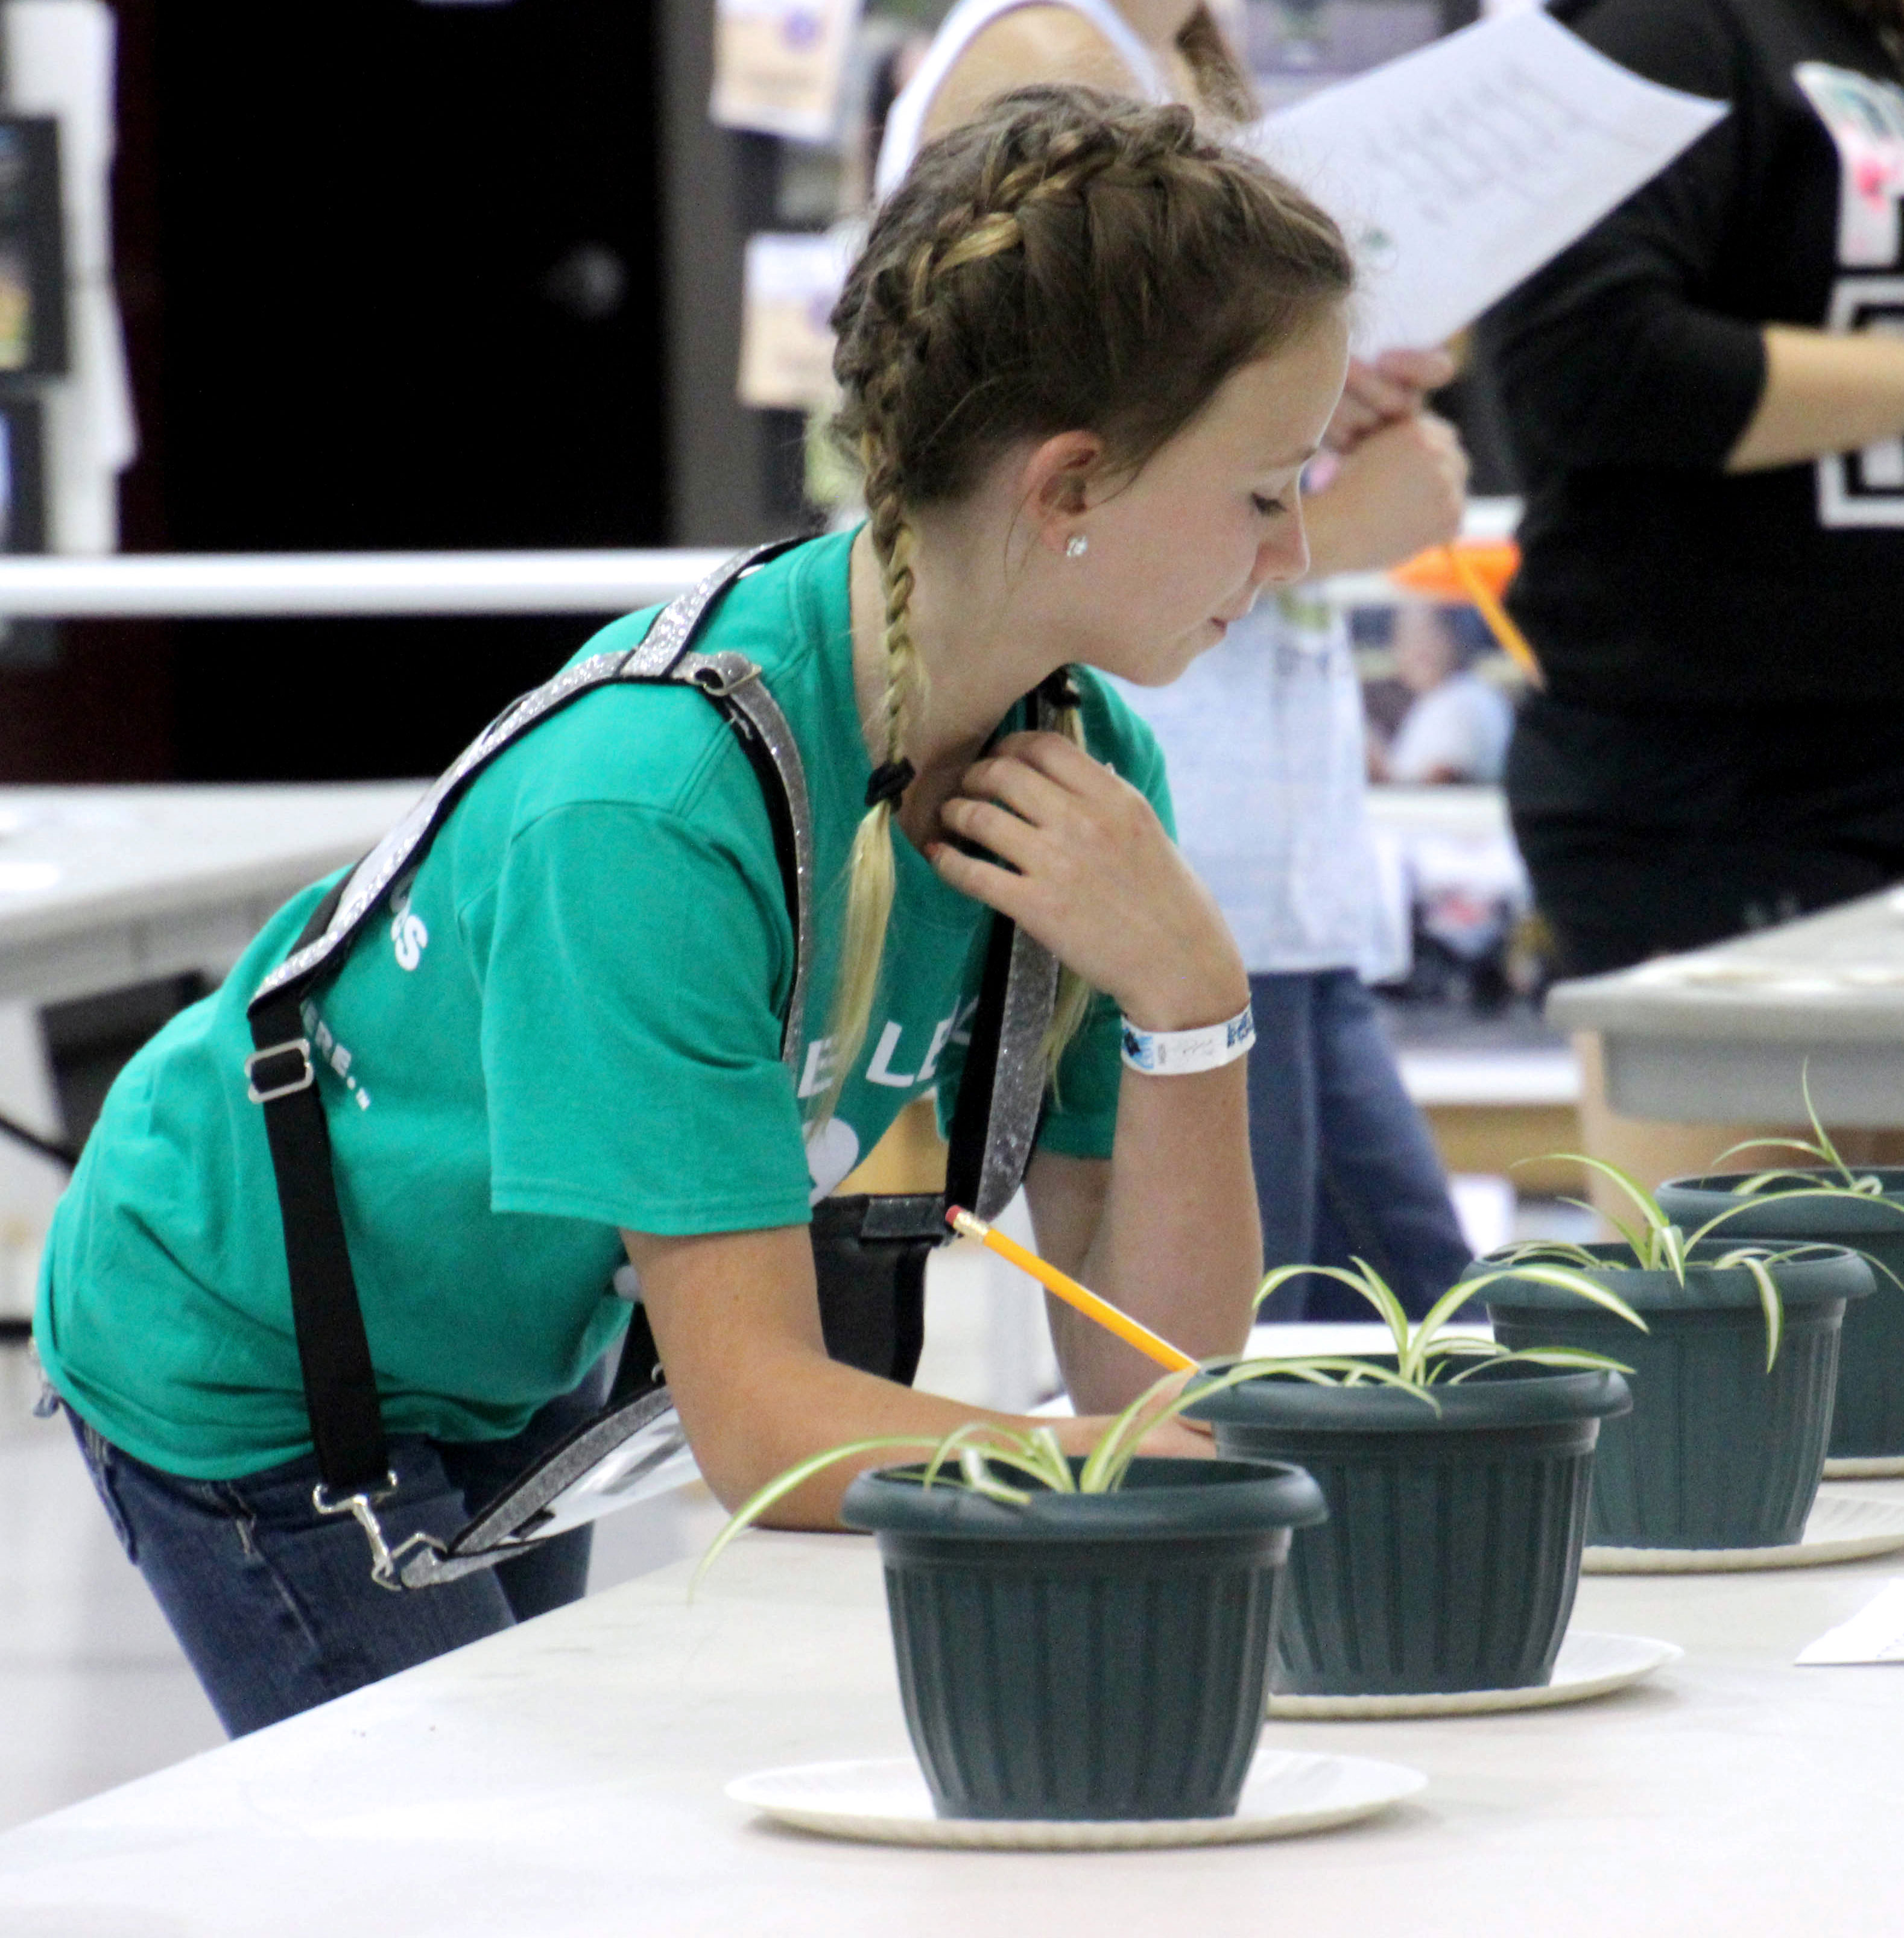 female 4-H youth inspecting a set of four potted plants on a table